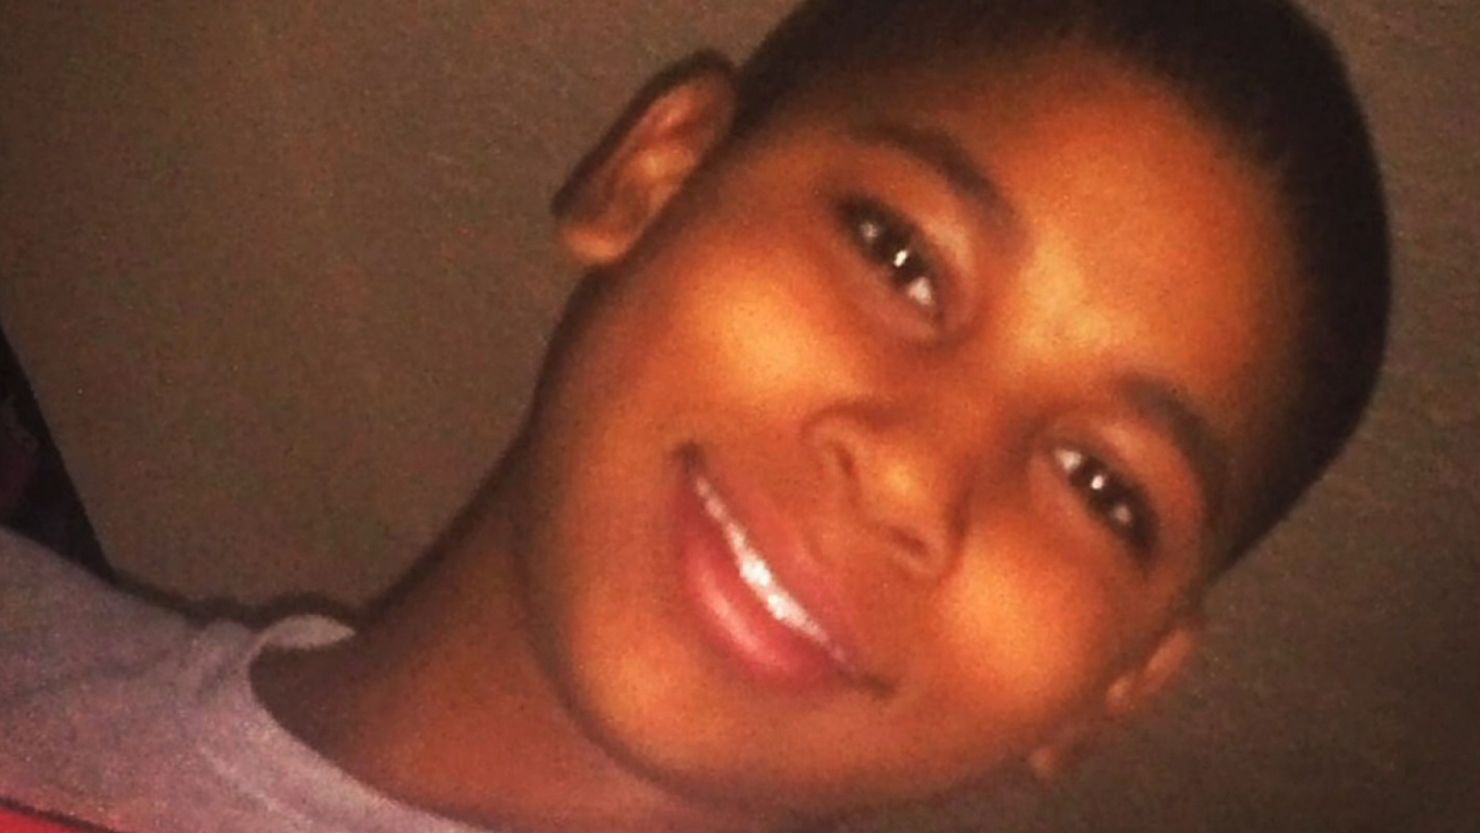 Tamir Rice, 12, was shot and killed by a Cleveland police officer in 2014.